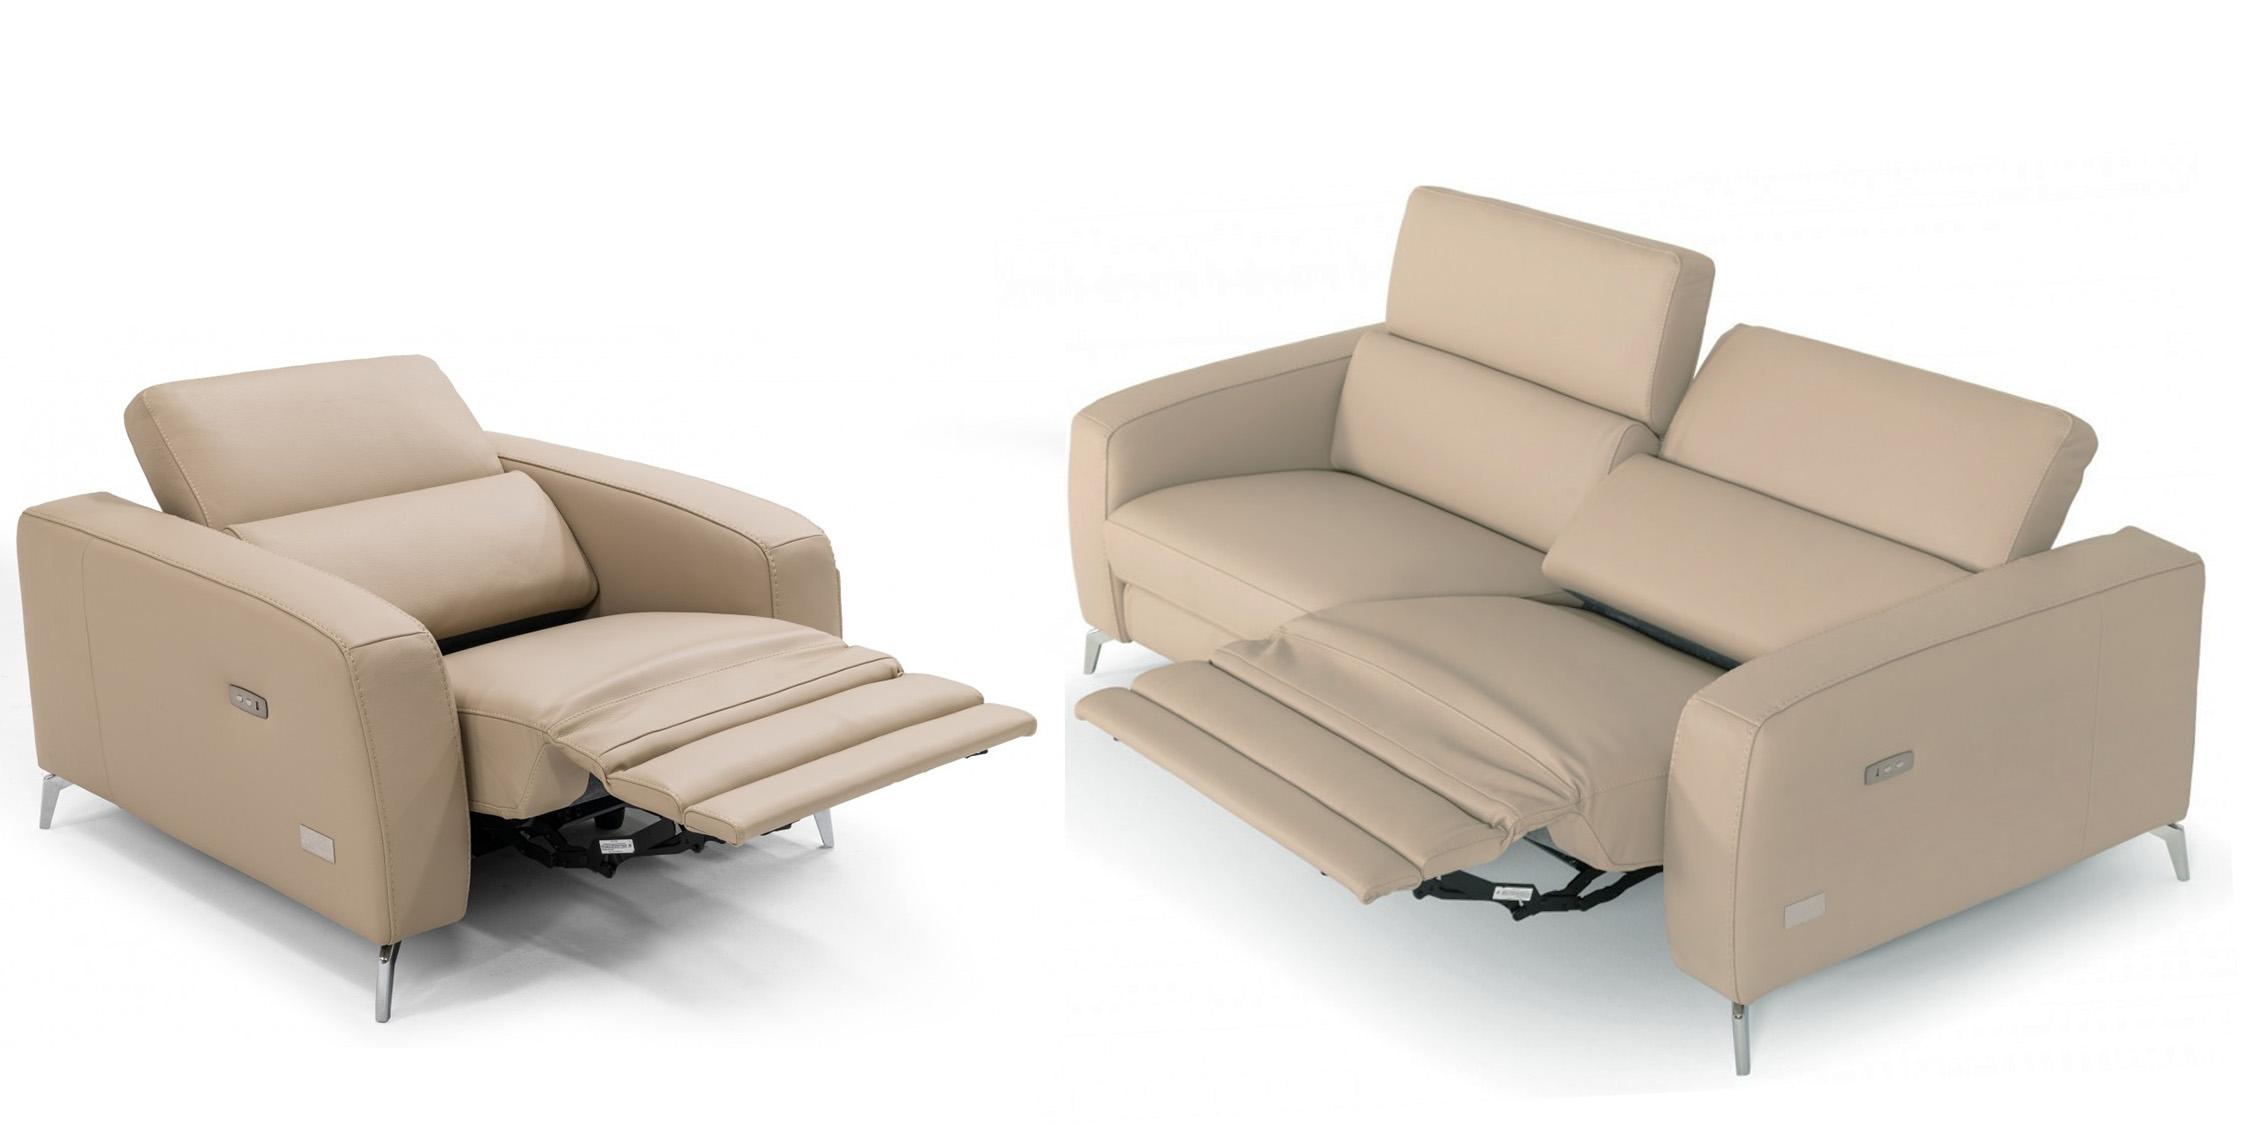 Contemporary, Modern Recliner Sofa Set VGCCROMA-SF-CAP-TAN-S-Set-2 VGCCROMA-SF-CAP-TAN-S-Set-2 in Tan Italian Leather